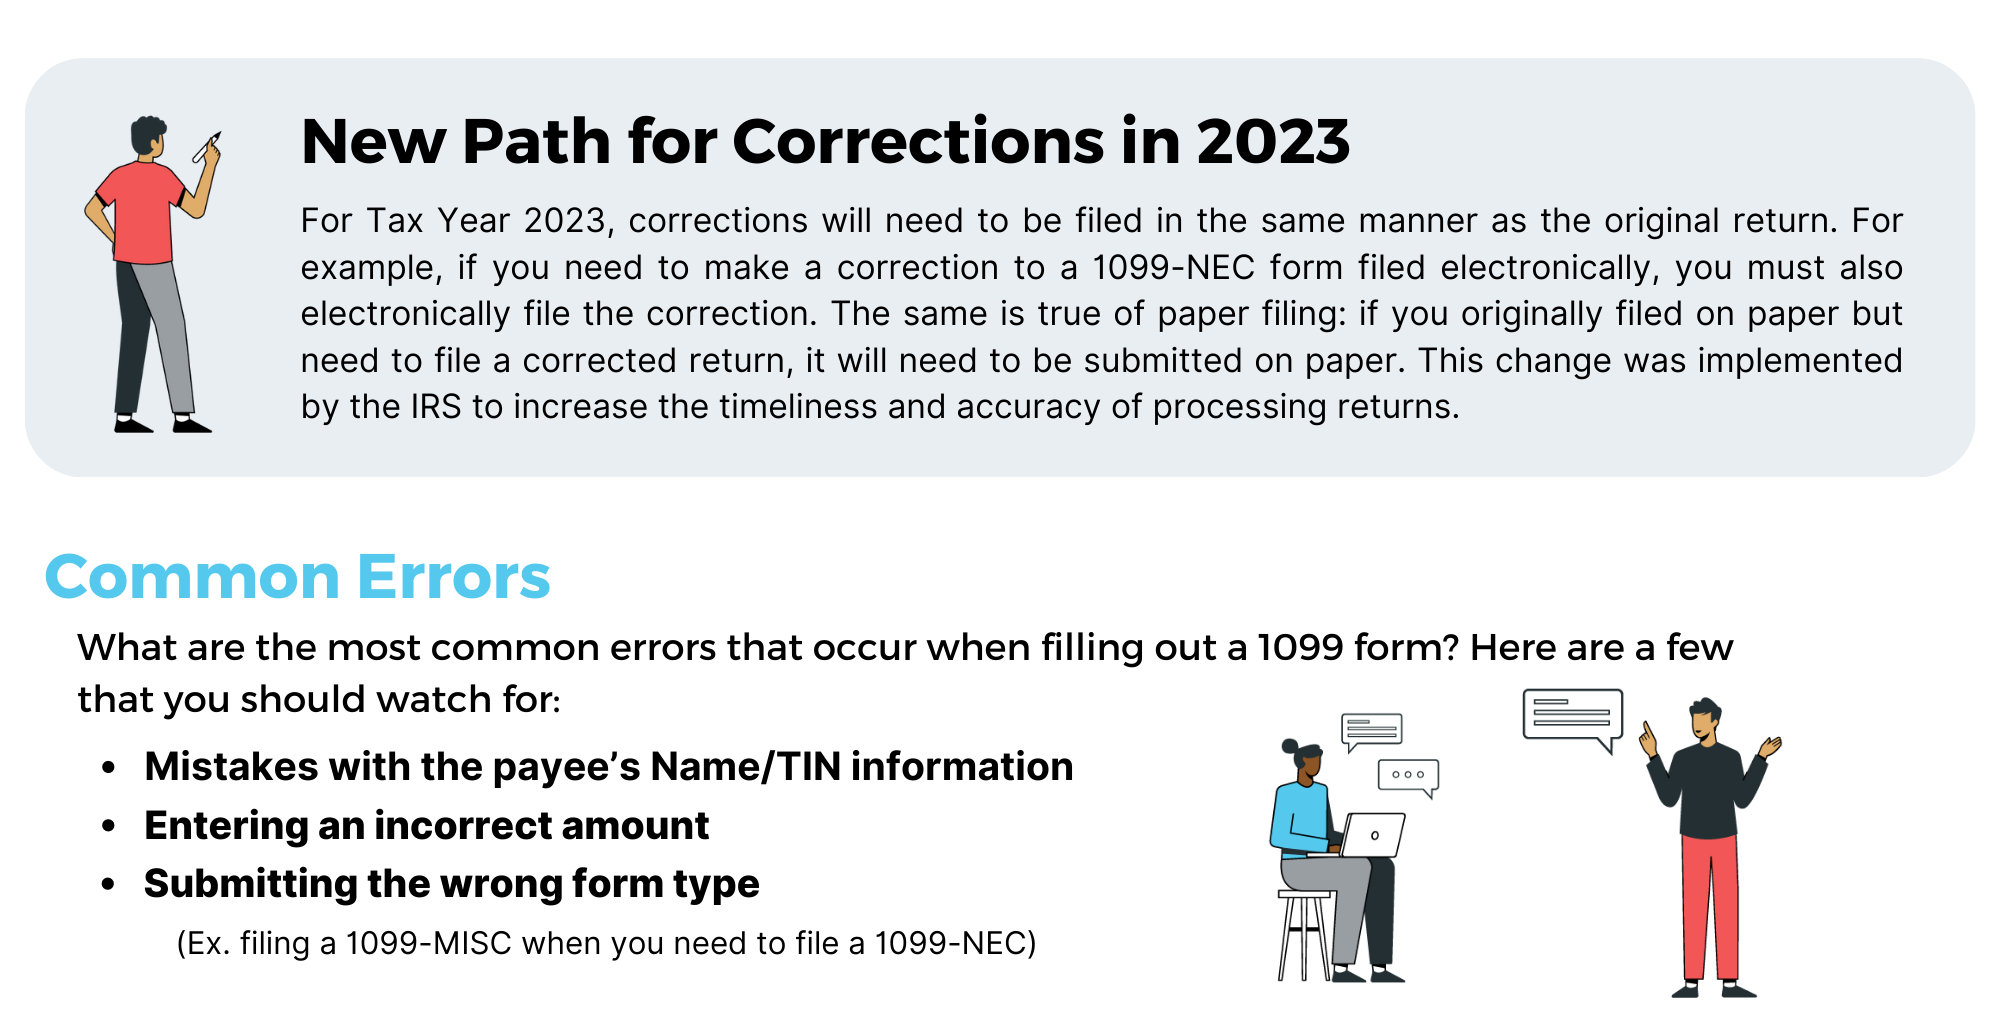 Corrections Guide for Tax Year 2023 and Common Errors that occur when filing a 1099 form.